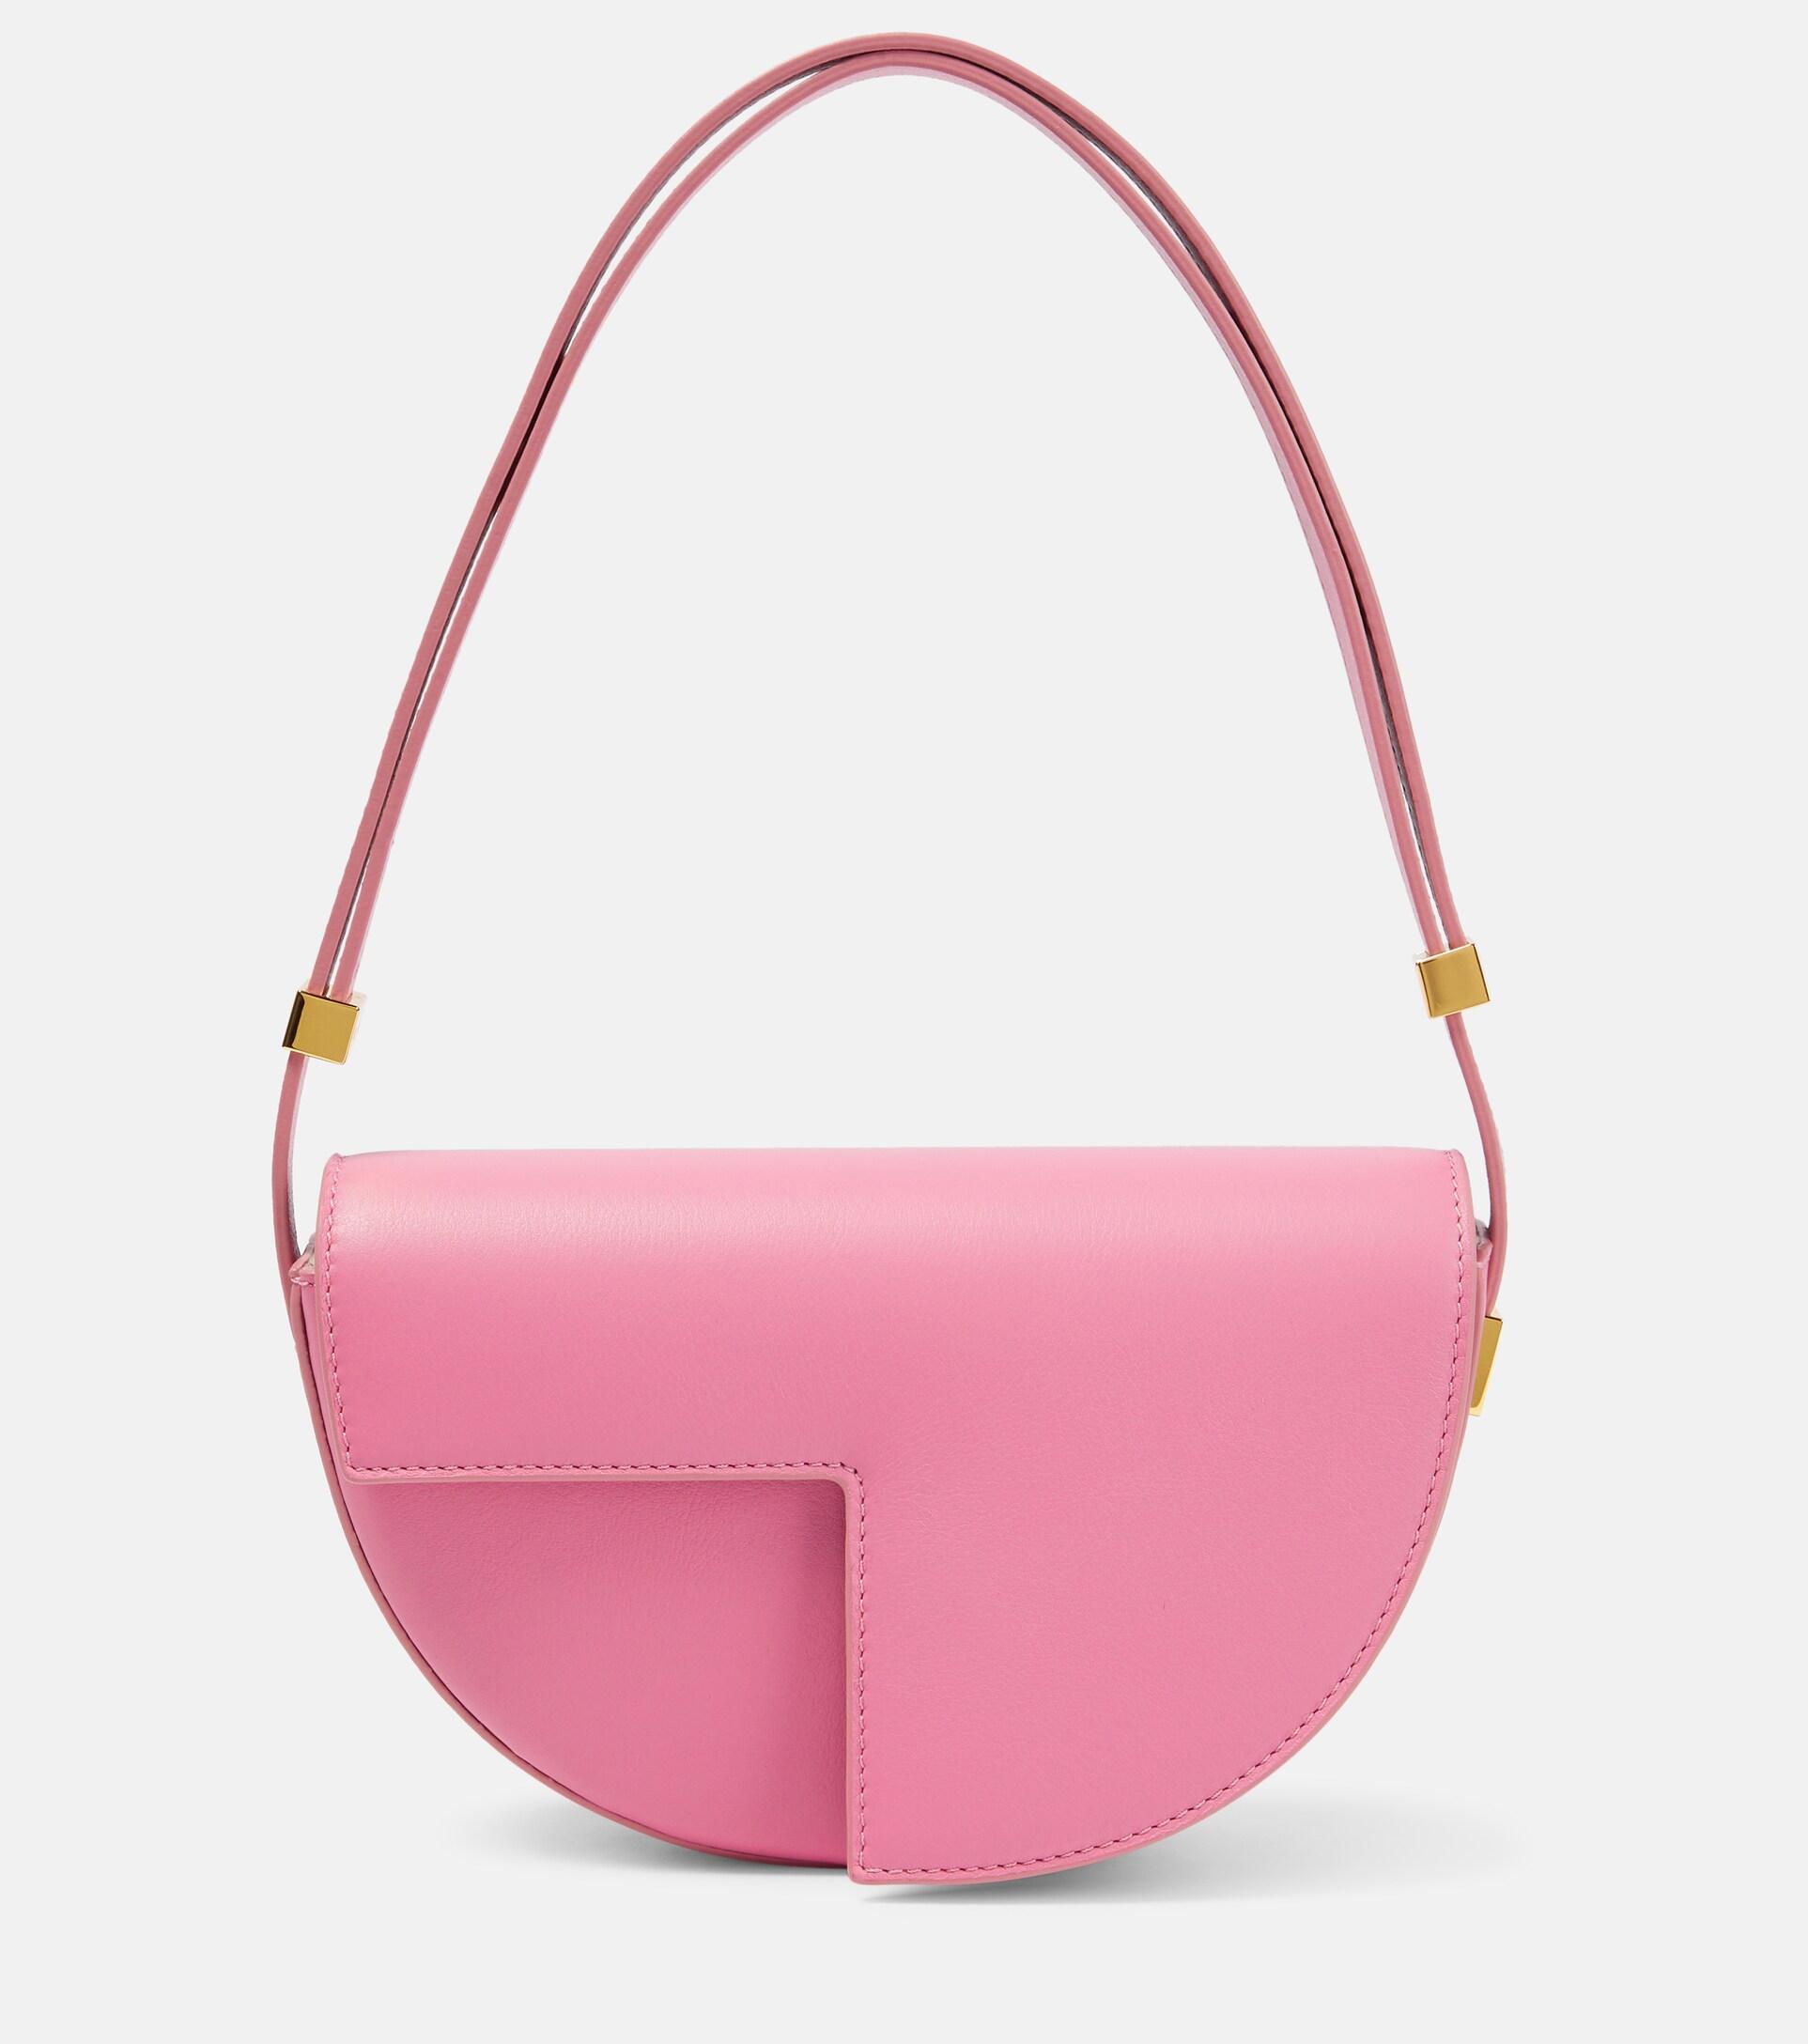 Patou Le Petit Small Leather Crossbody Bag in Pink | Lyst